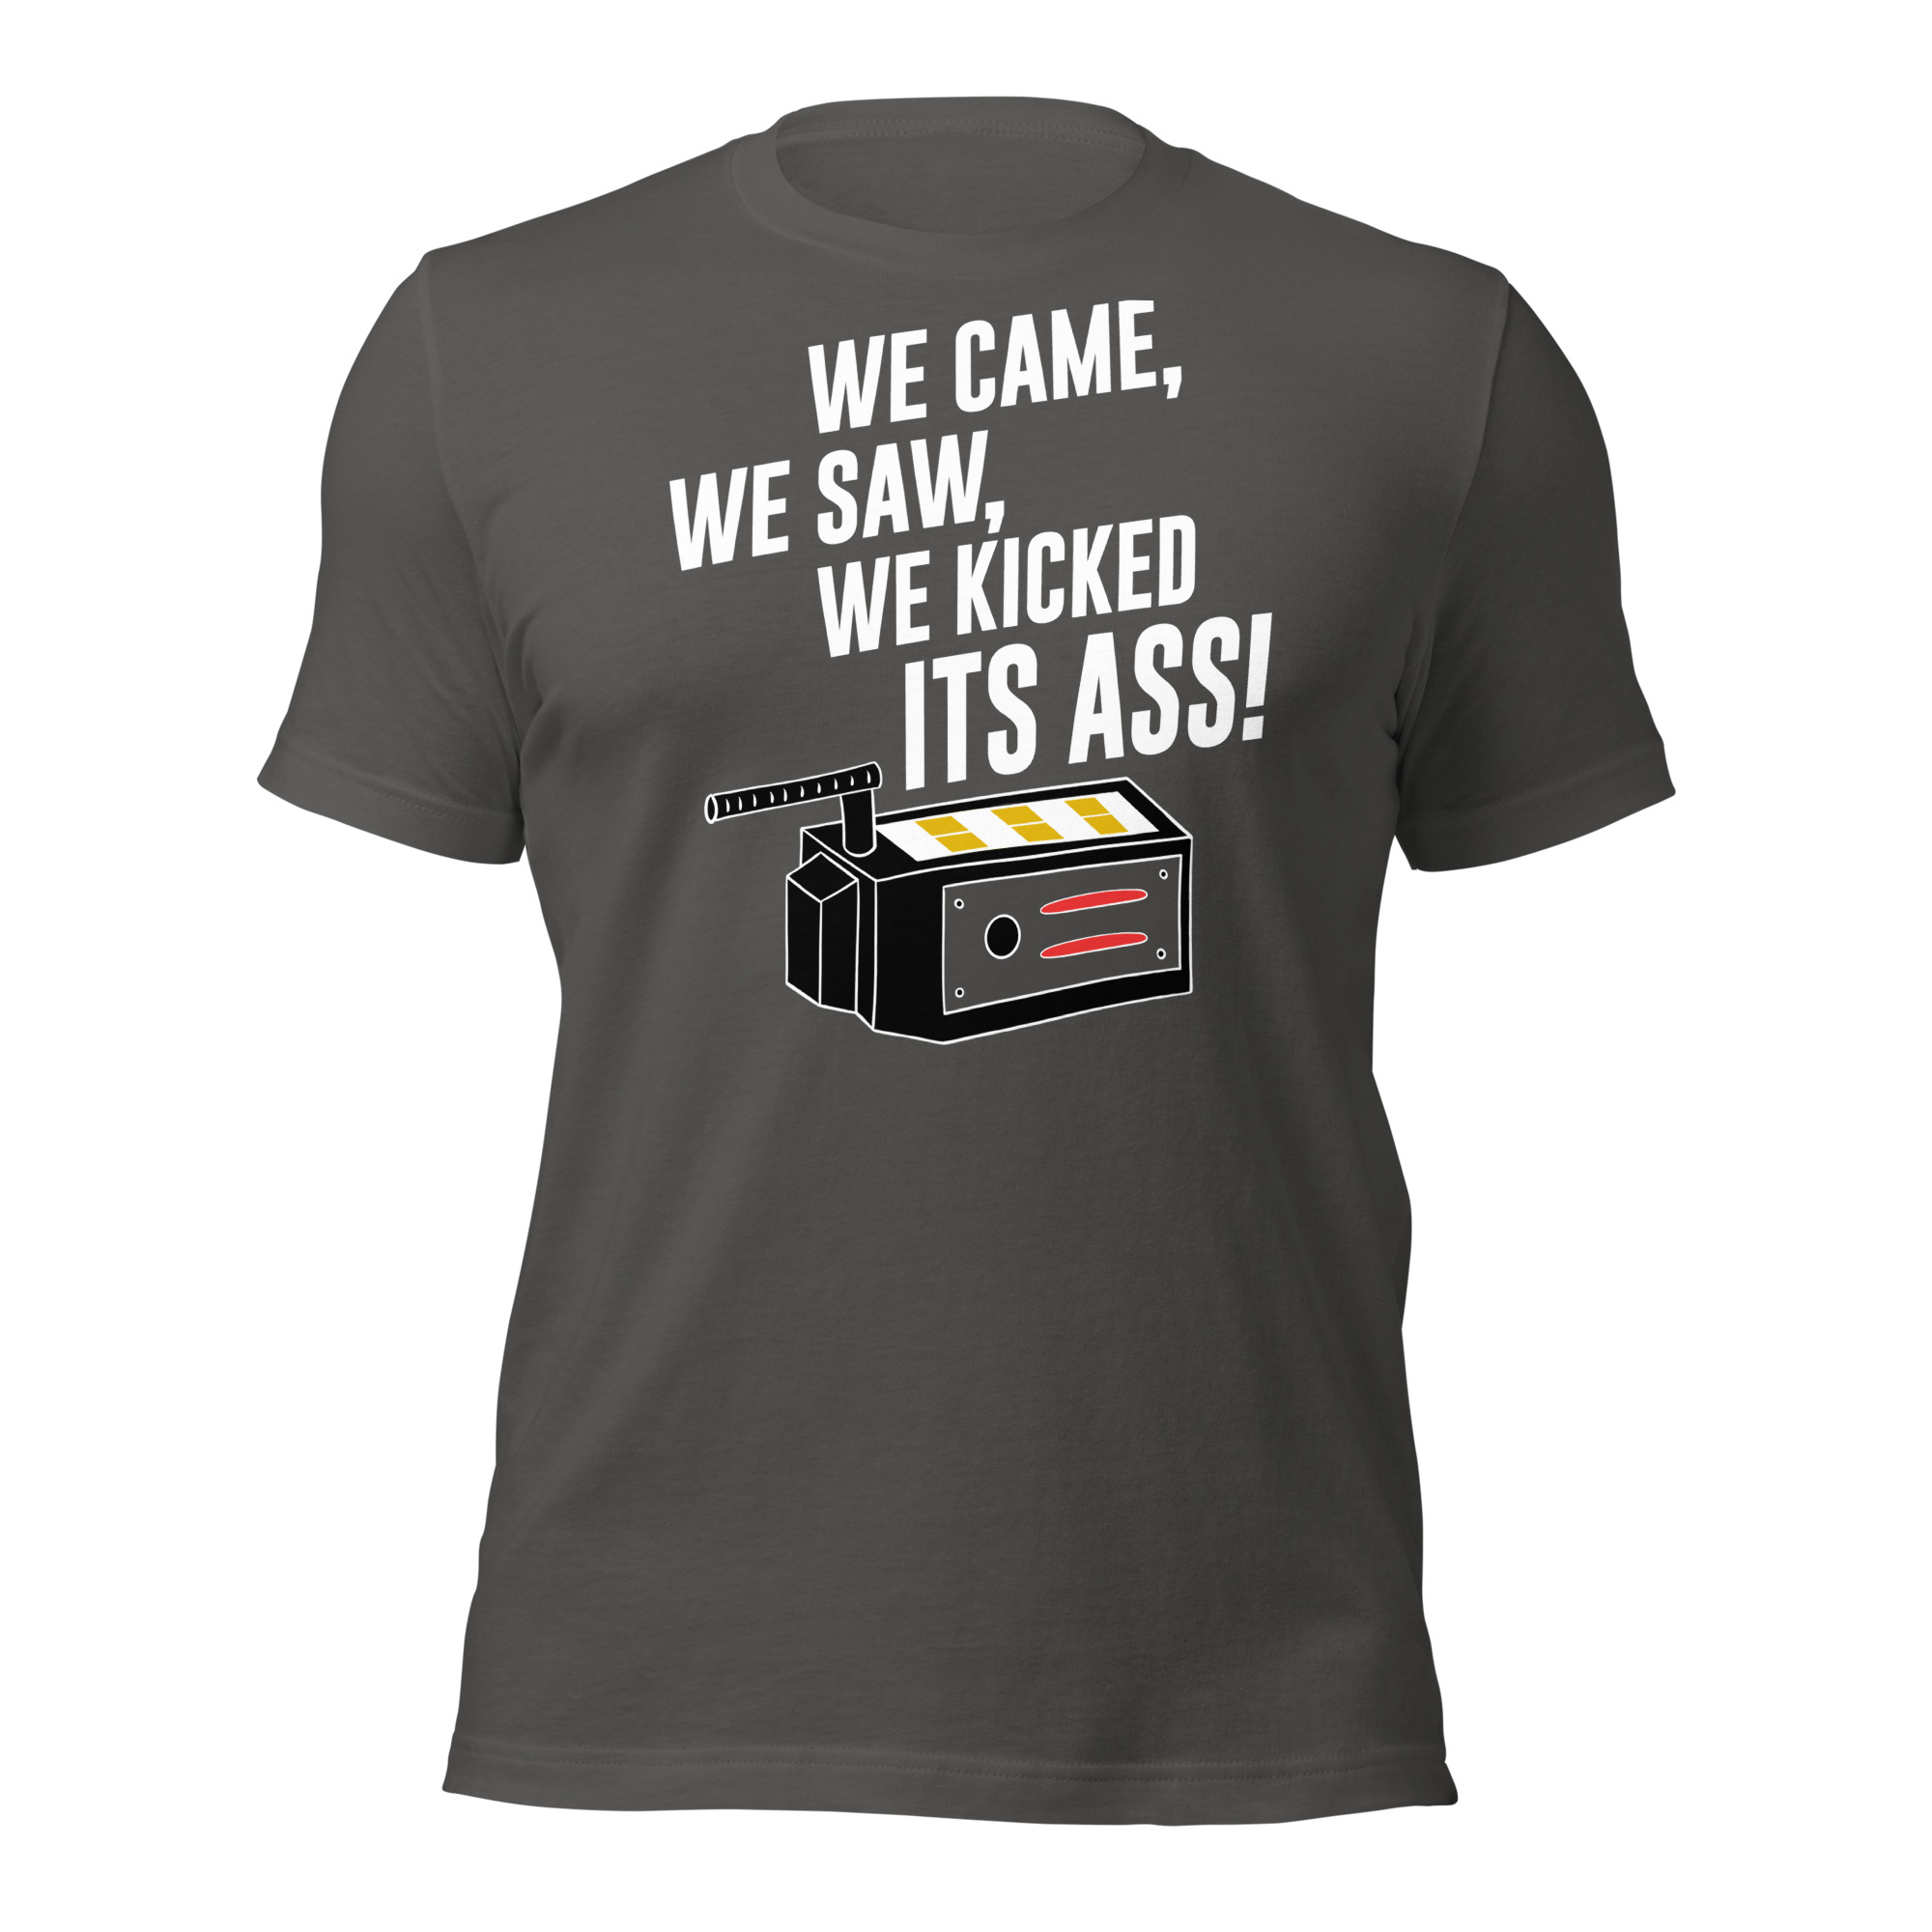 Ghostbusters Inspired - We Came, We Saw, We Kicked Its Ass T-Shirt